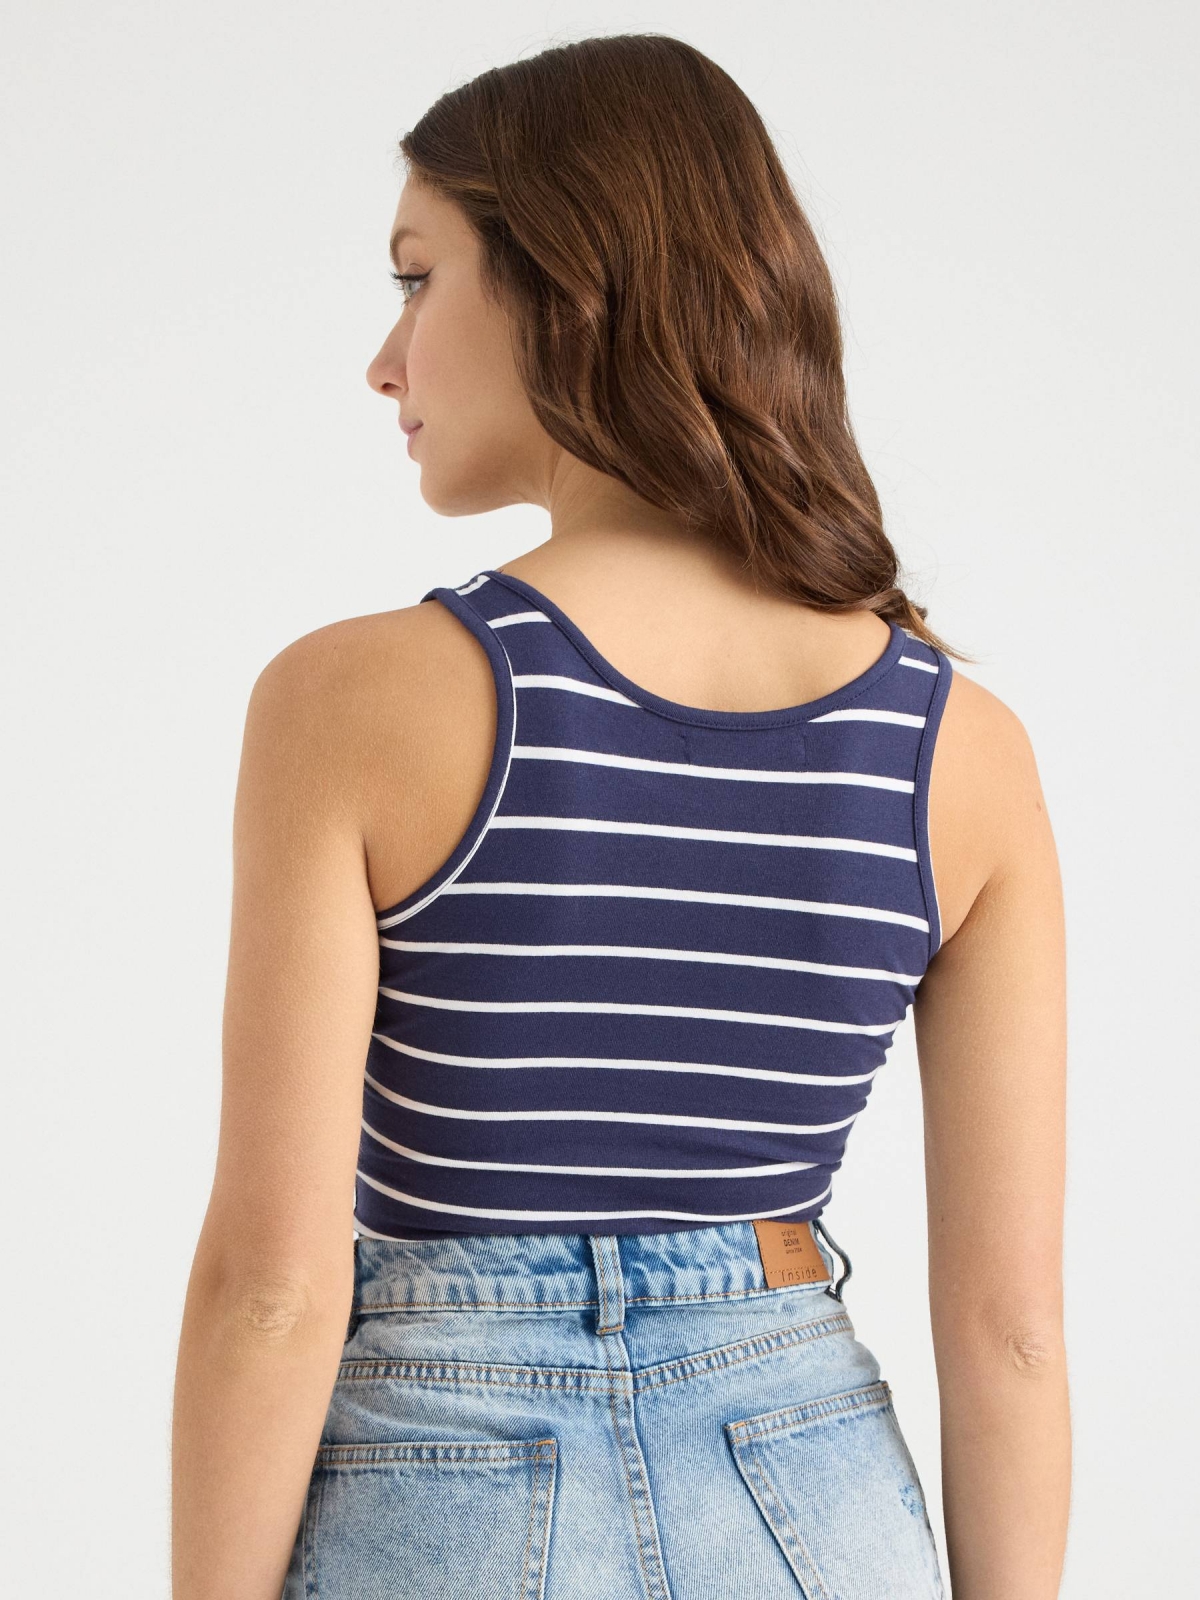 Striped cropped tank t-shirt blue middle back view